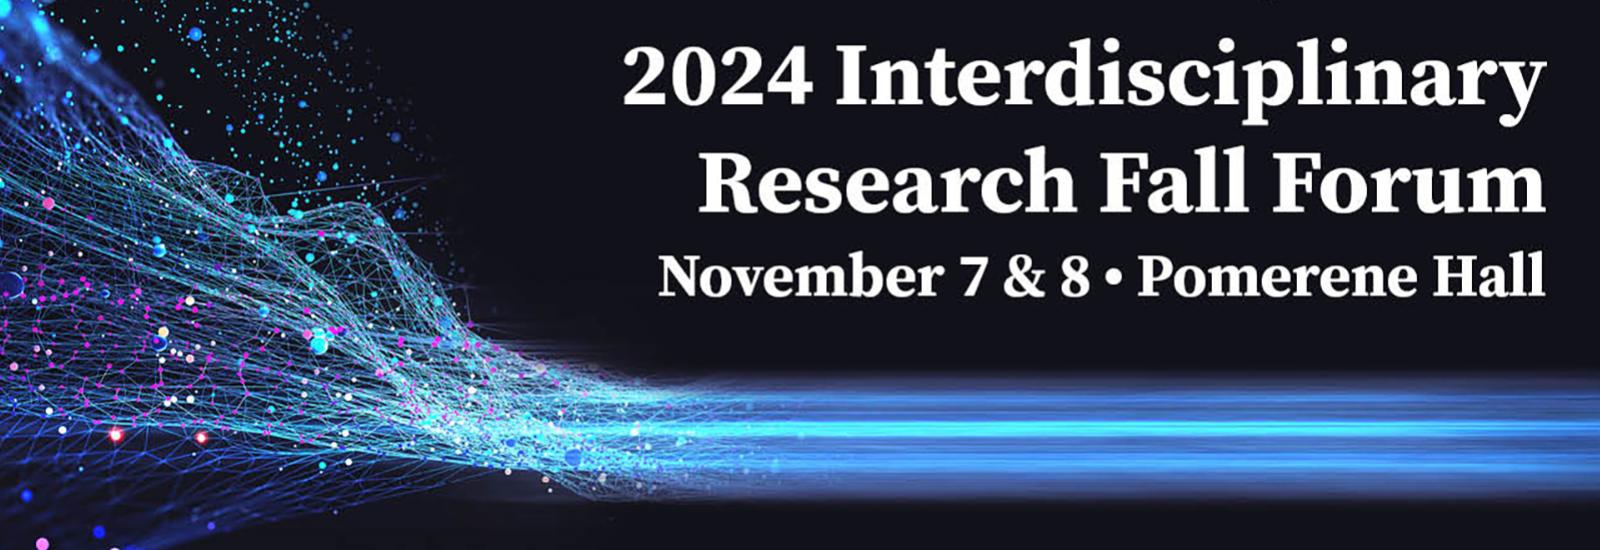 Title Card for 2024 Interdisciplinary Research Fall Forum - Nov. 7 and 8, Pomerene Hall